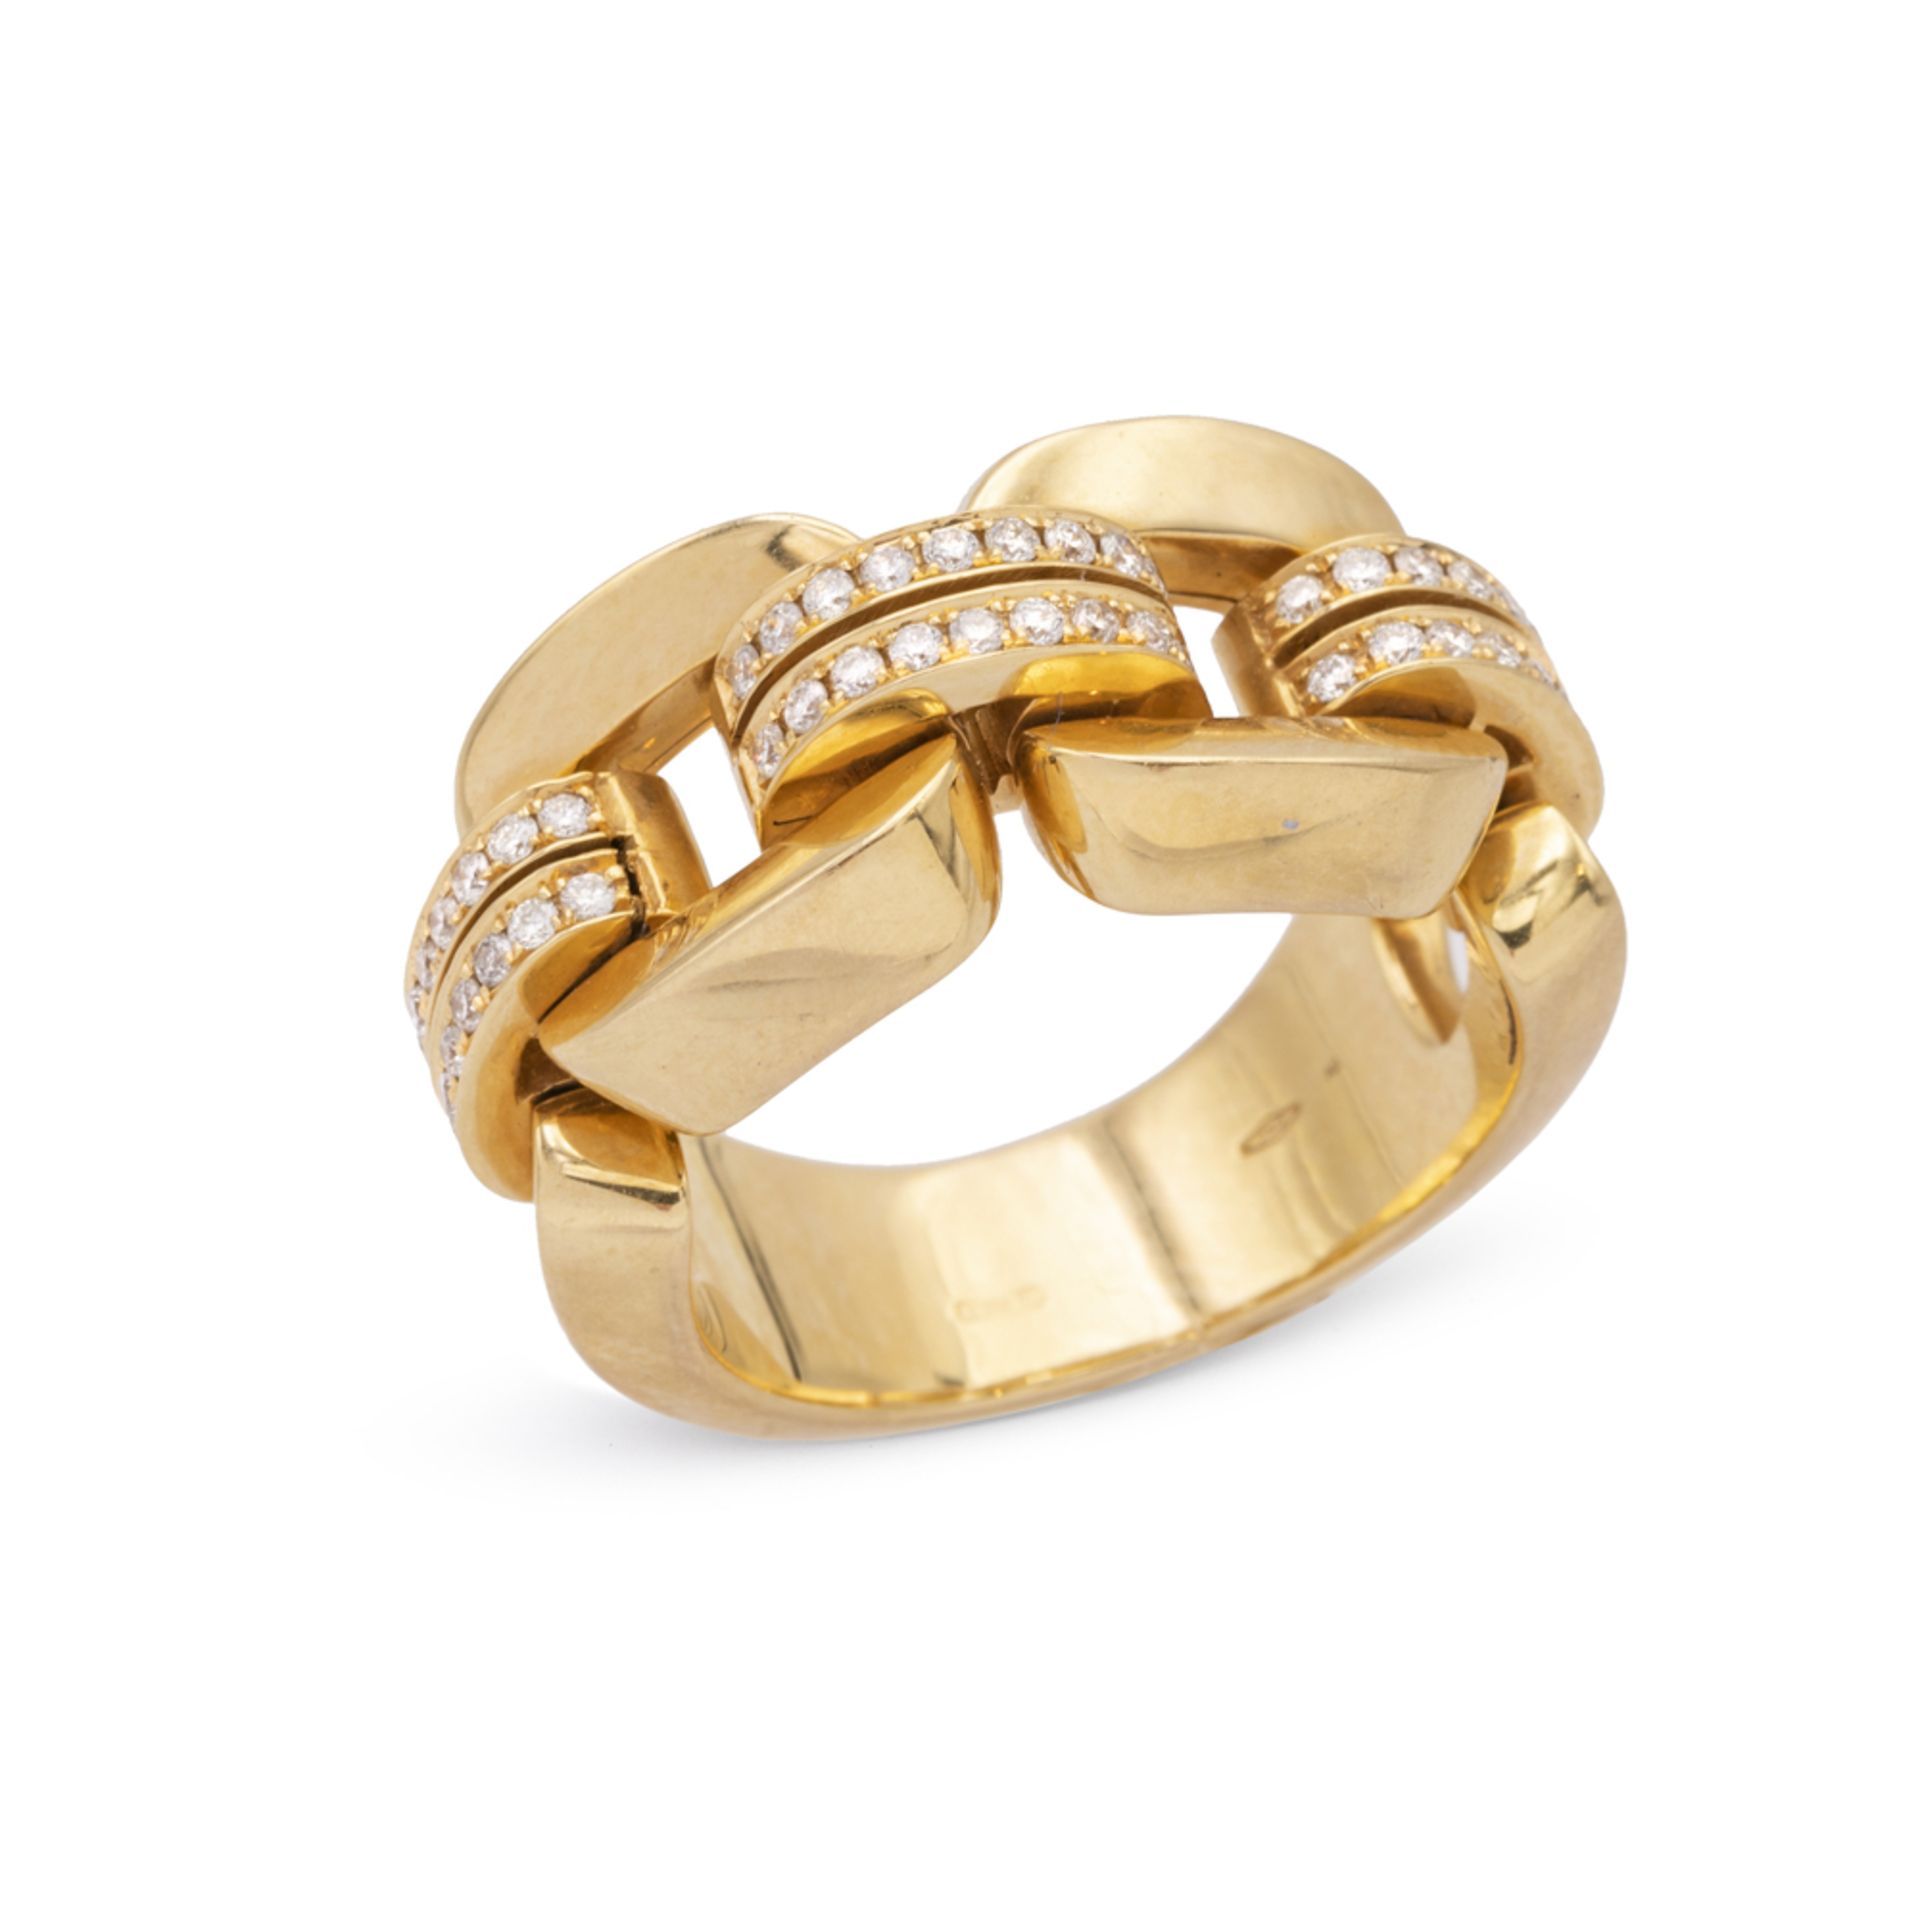 Chimento 18kt yellow gold and diamonds ring